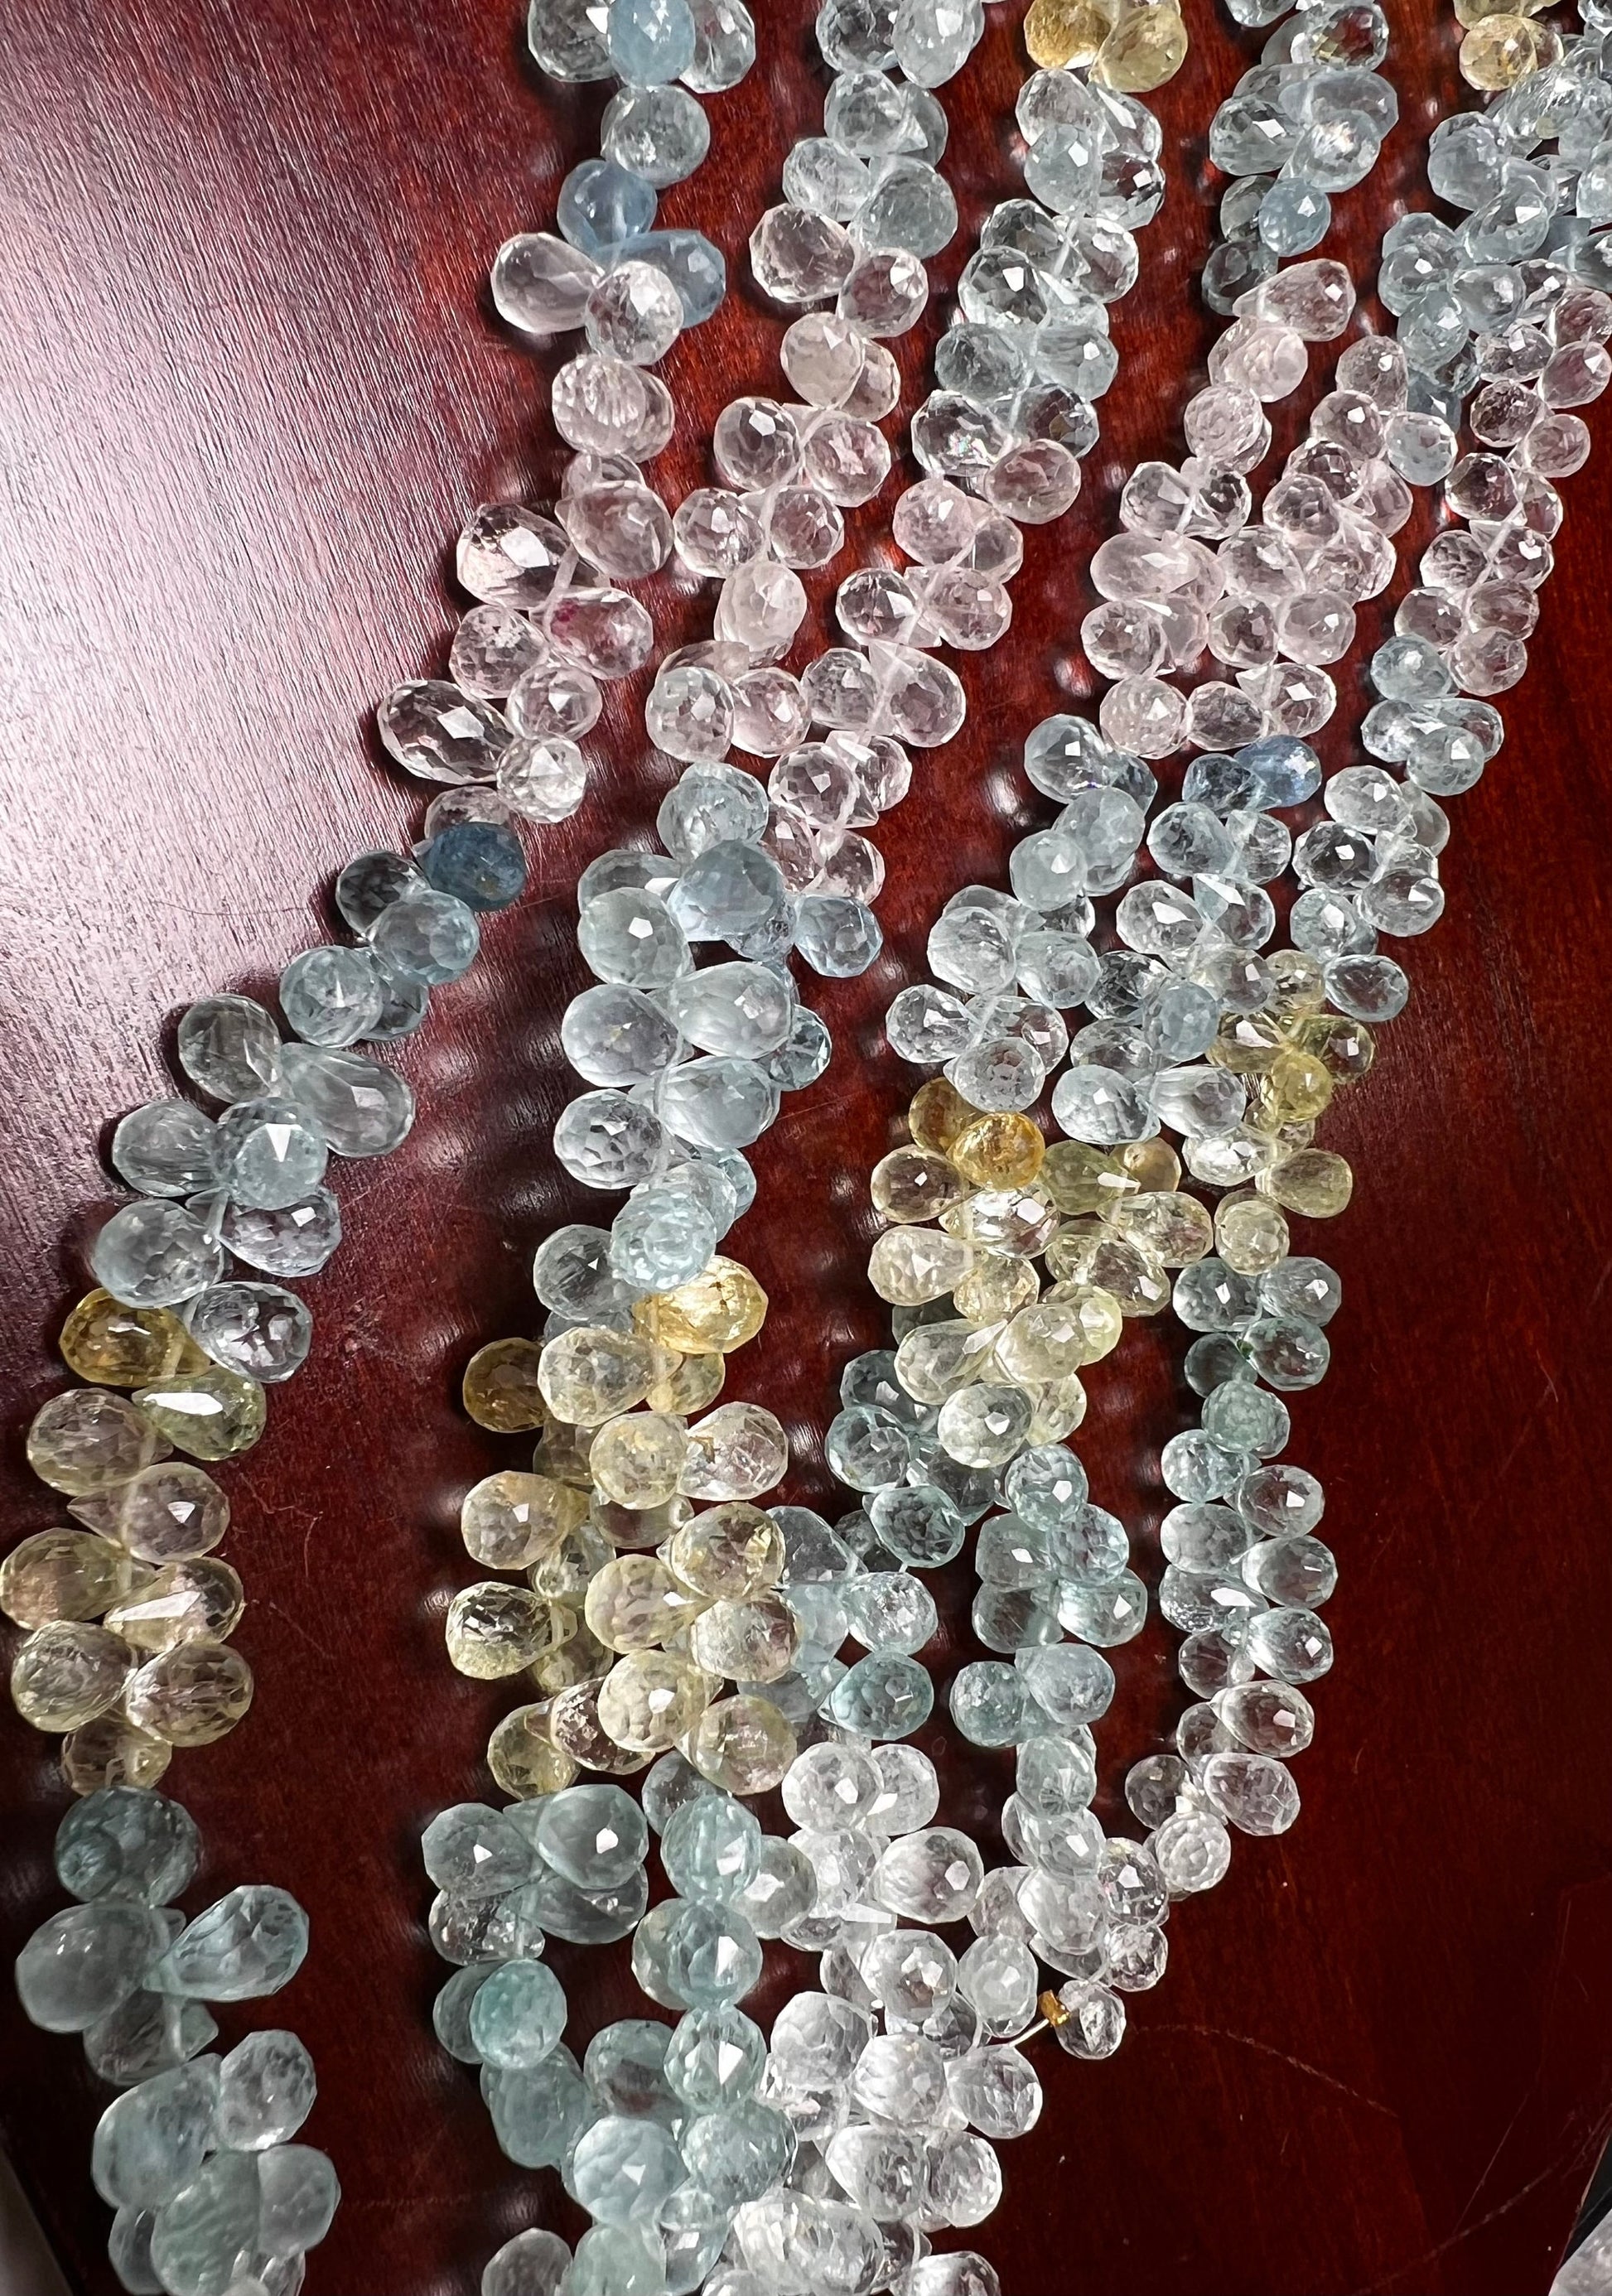 Natural Aquamarine Morganite Facetrd Briolette round Drop 6x7-8mm Jewelry Making Beads 40 pcs 1/2 approx 4” and 80 pcs approx 8” full strand